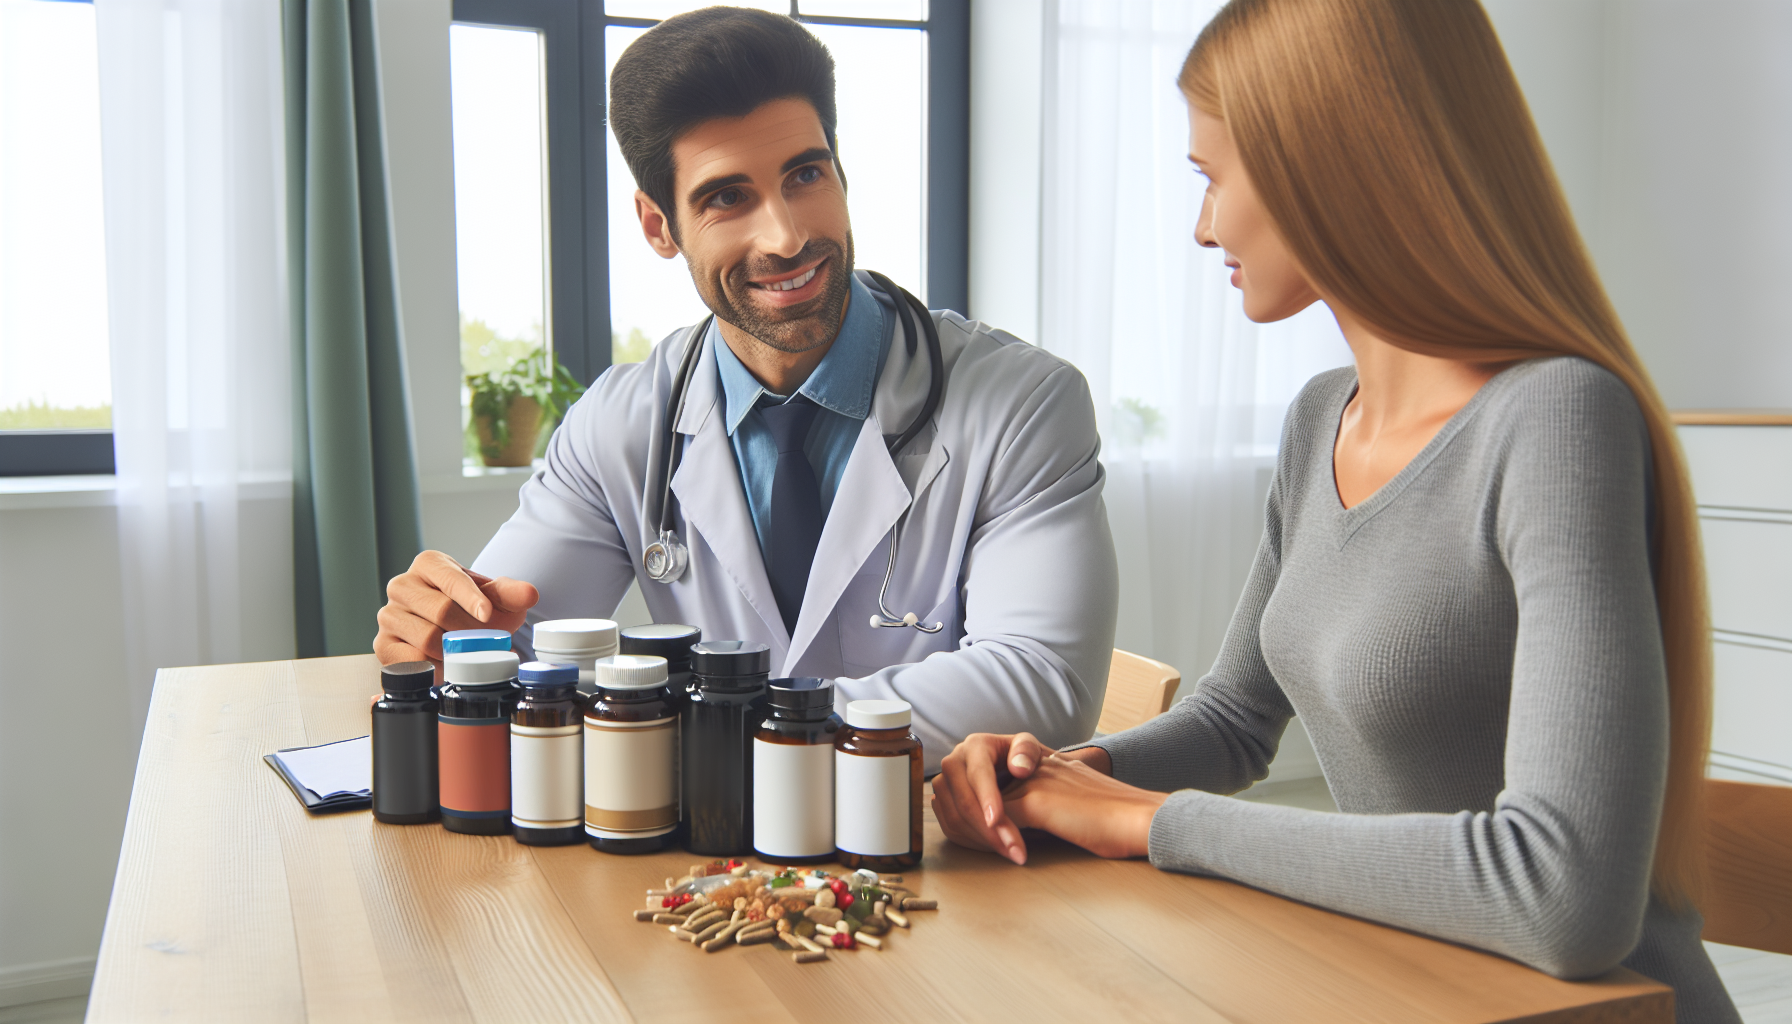 Illustration of a person selecting the right berberine supplement with the help of a healthcare professional